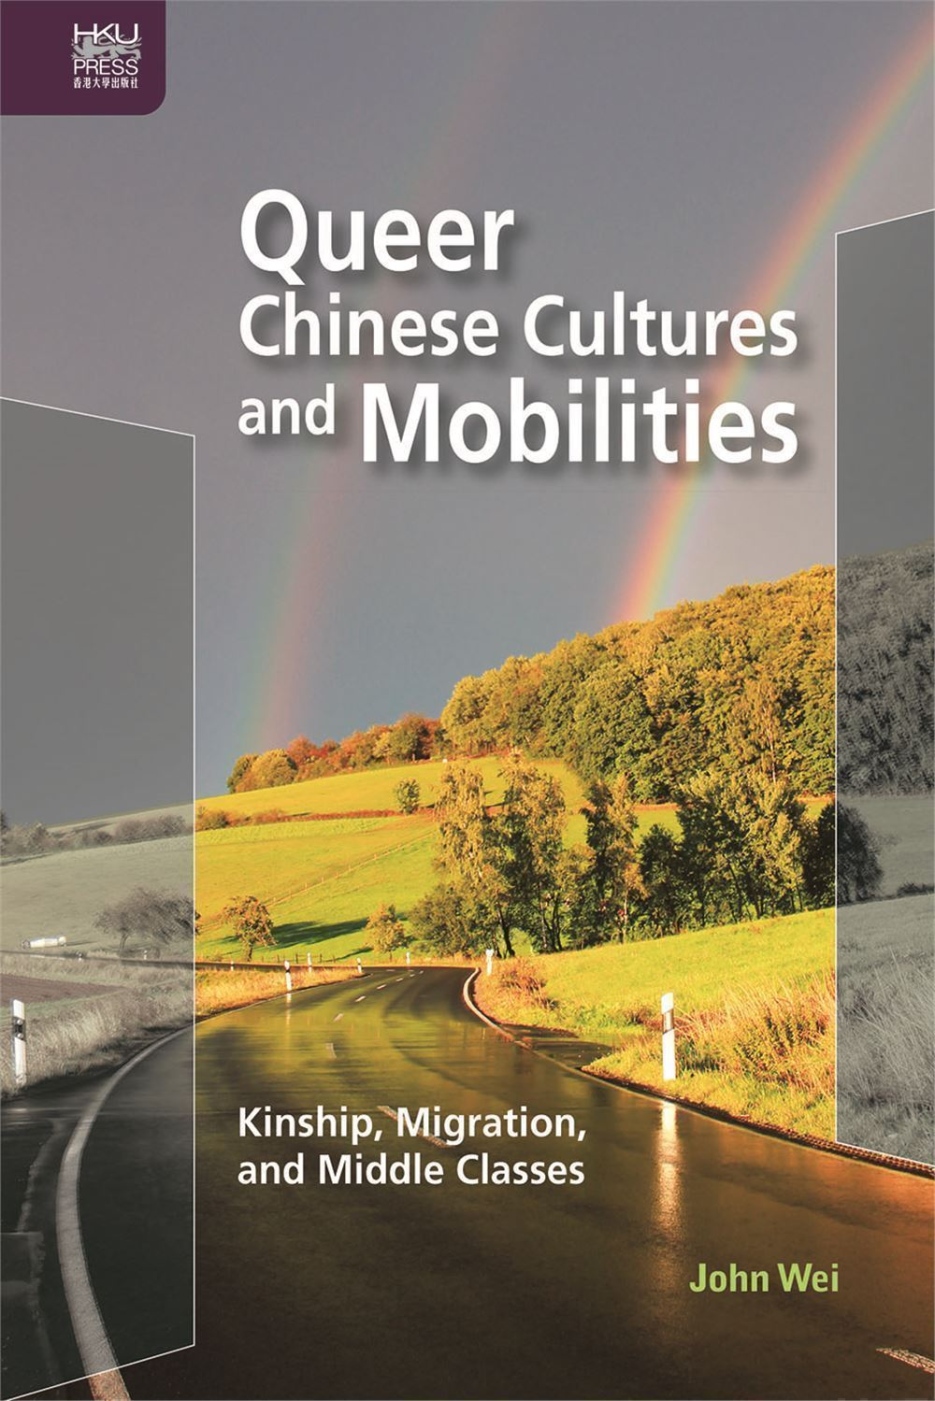 Queer Chinese Cultures and Mob...